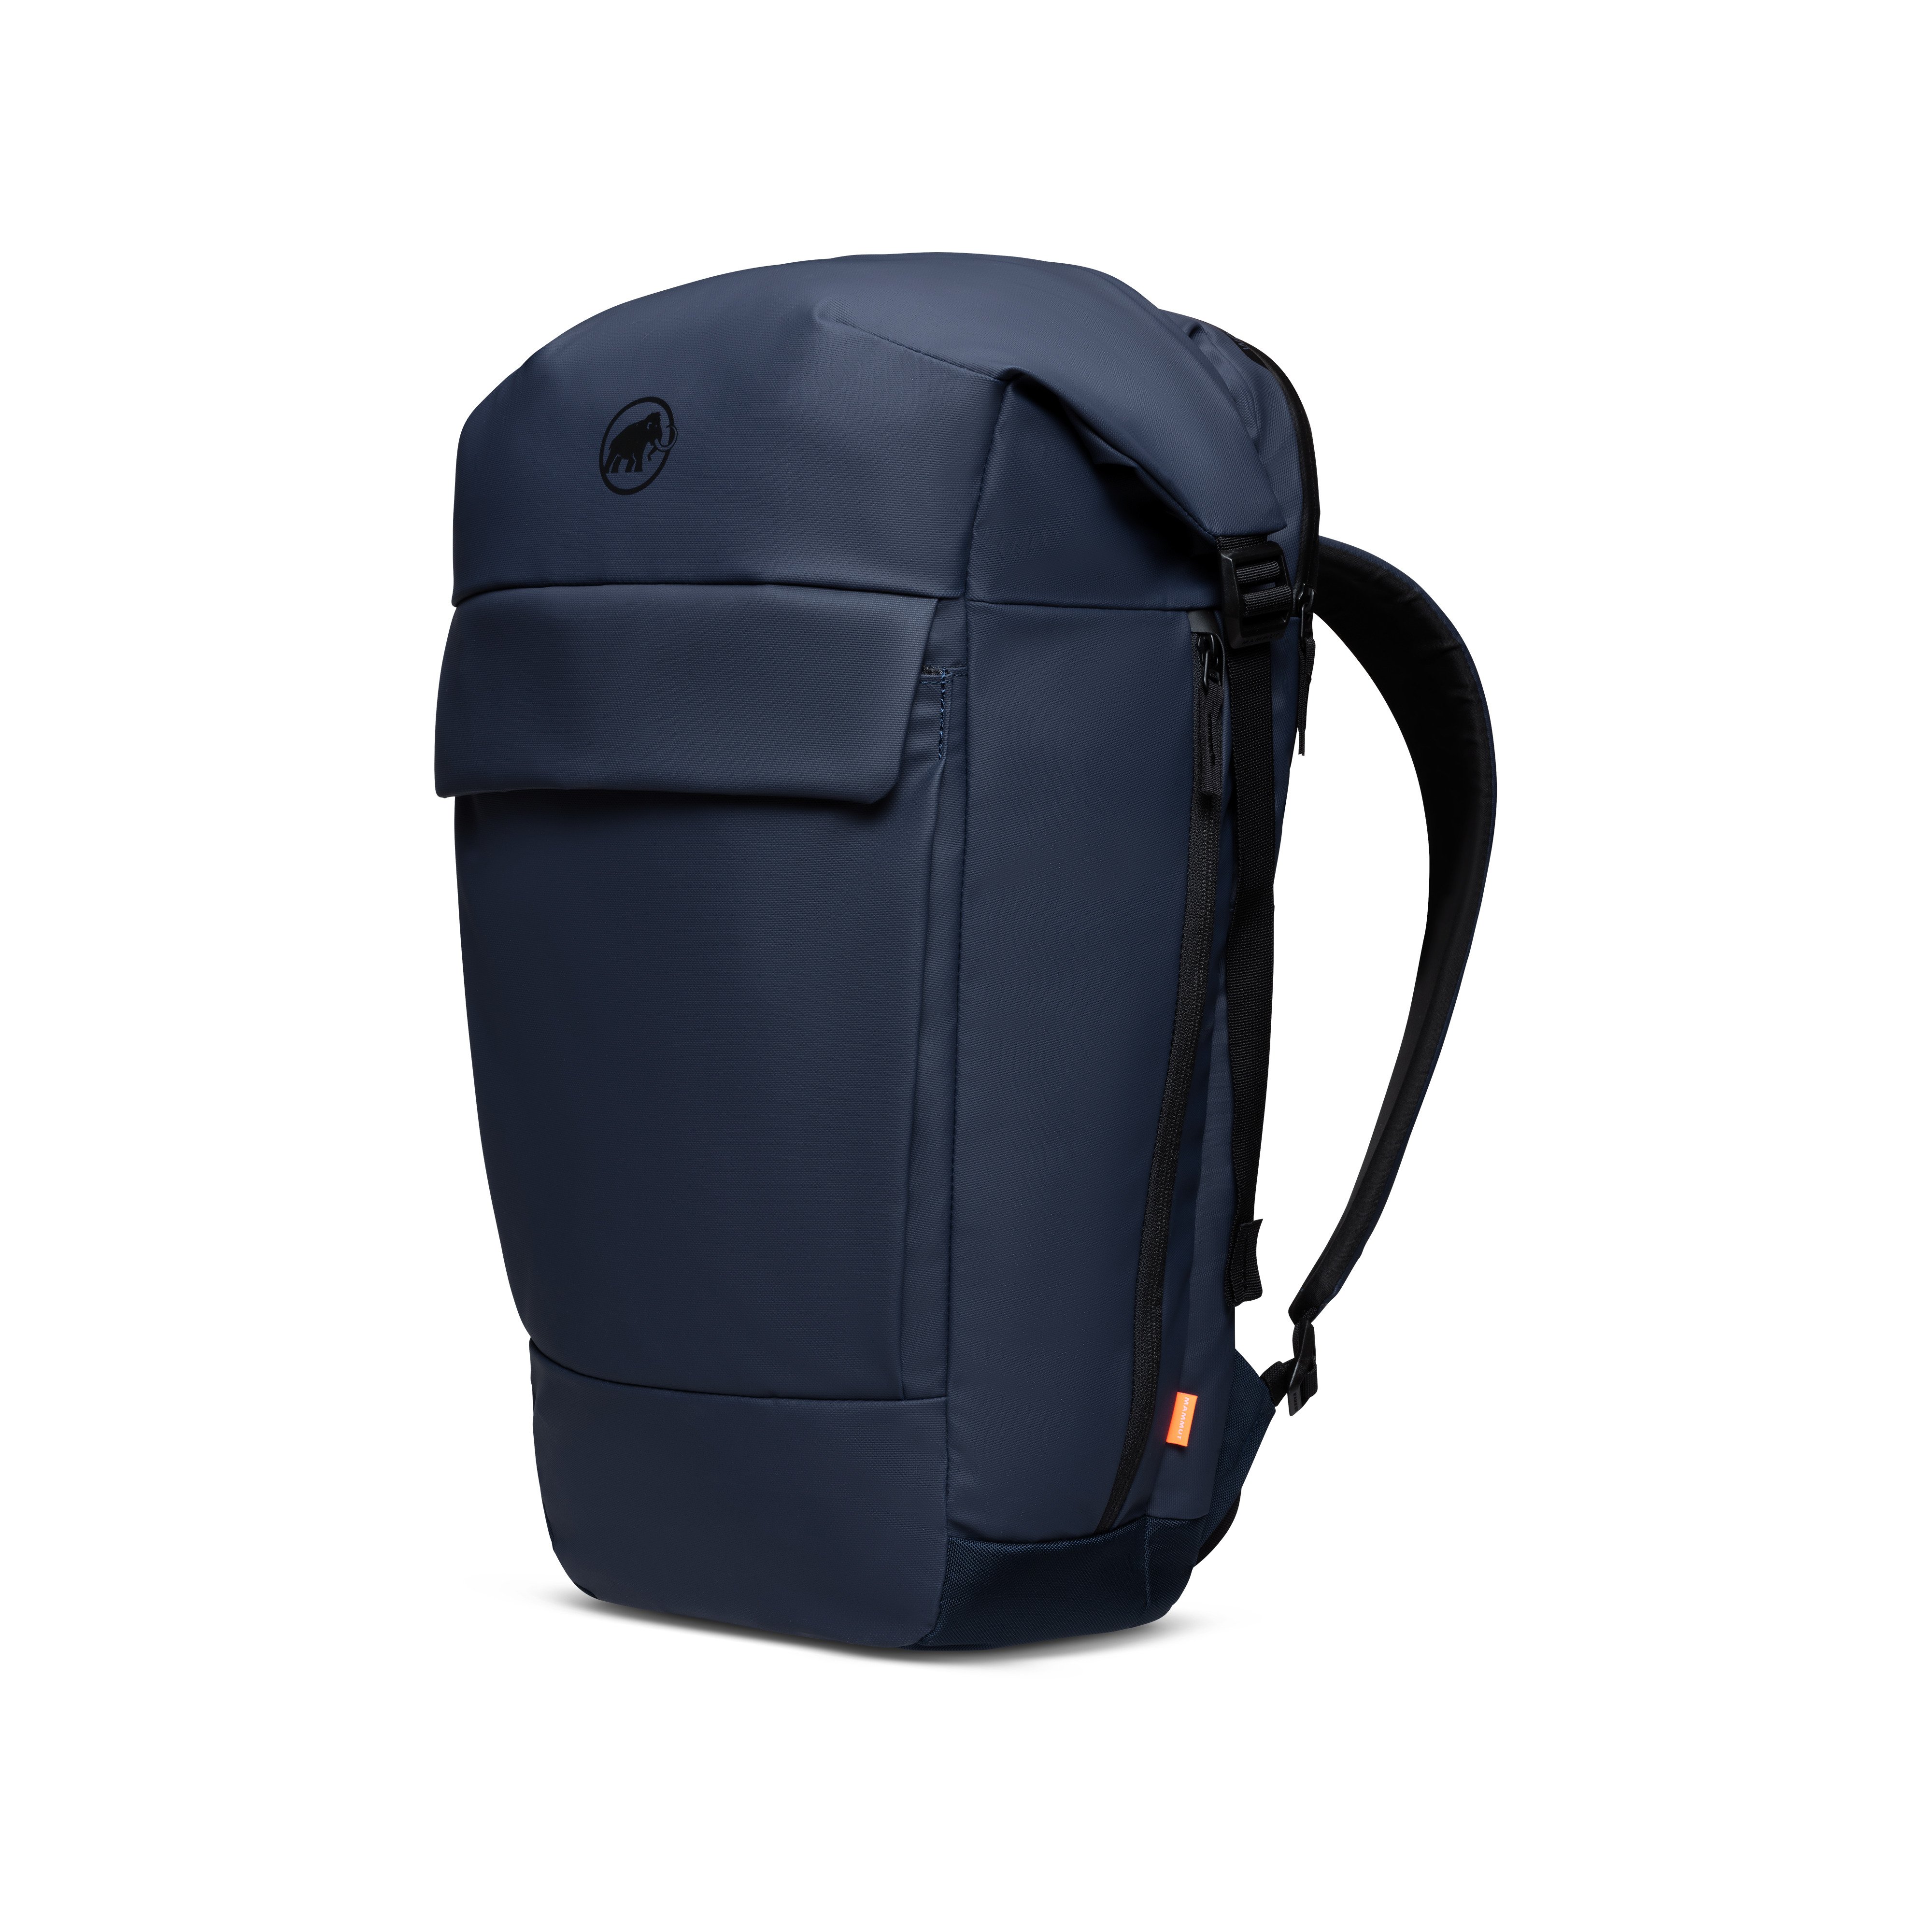 Seon Courier 30 - marine, 30 L product image